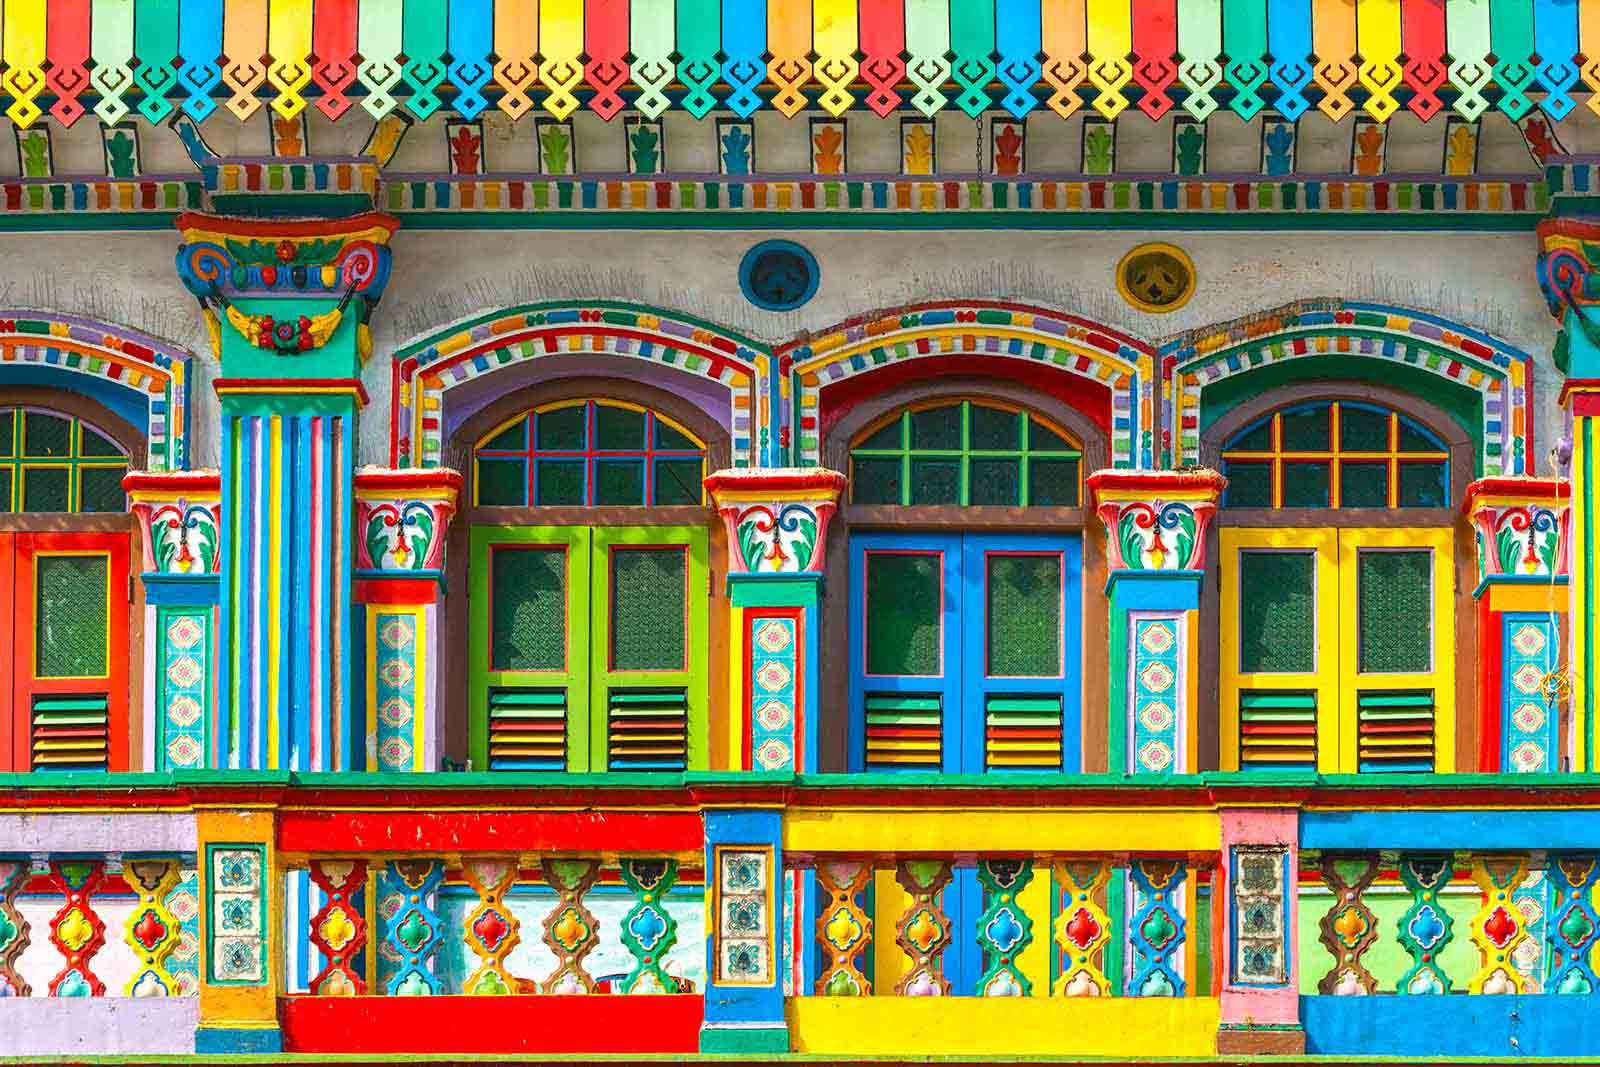 Colourful buildings in little India, Singapore | Top reasons to visit Singapore